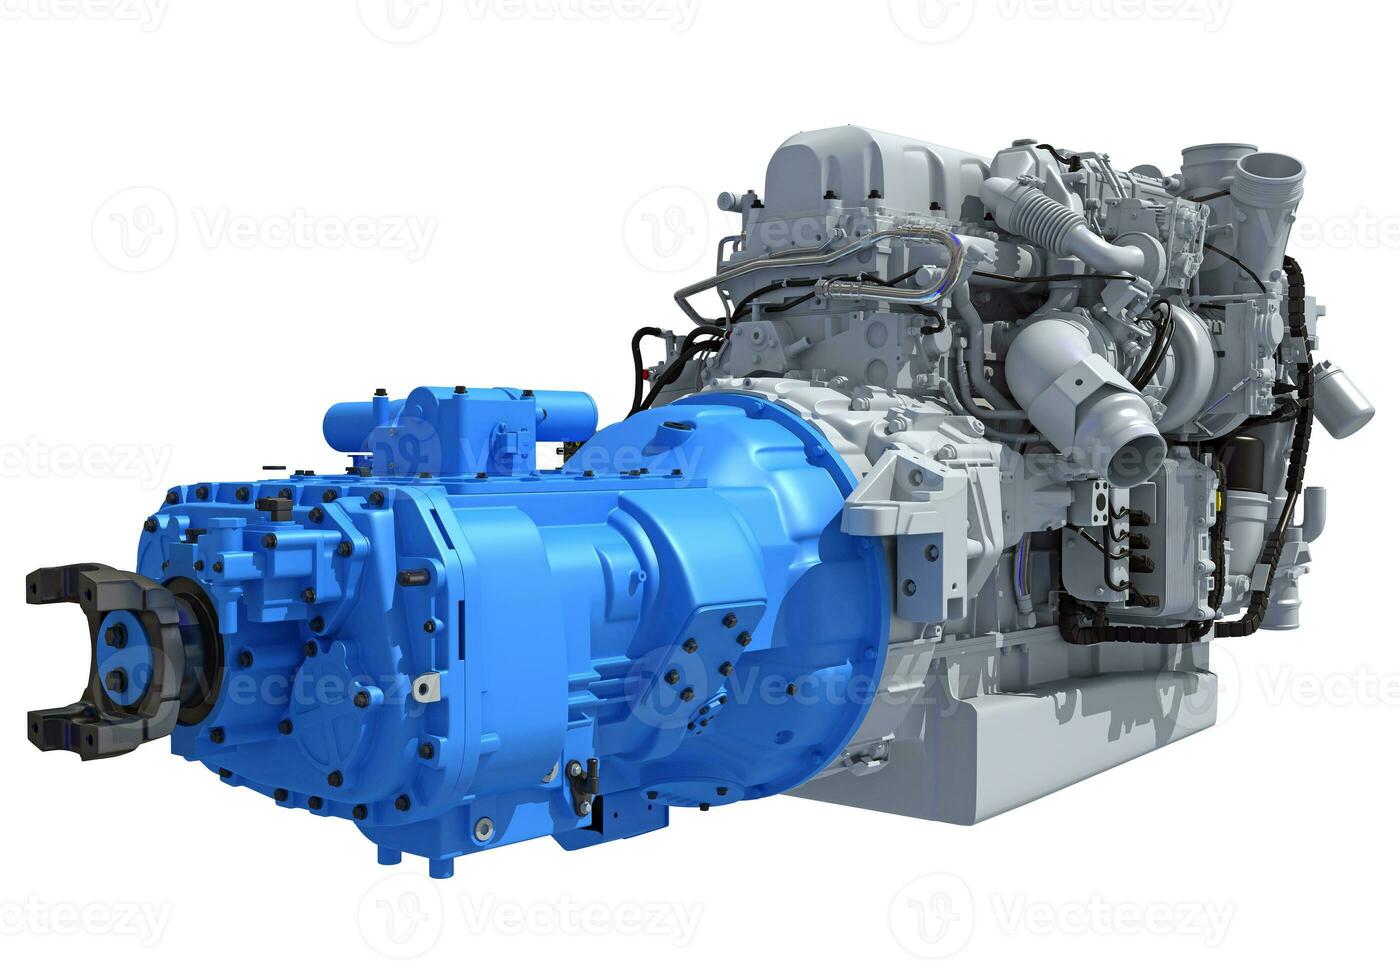 Truck Engine 3D rendering on white background photo